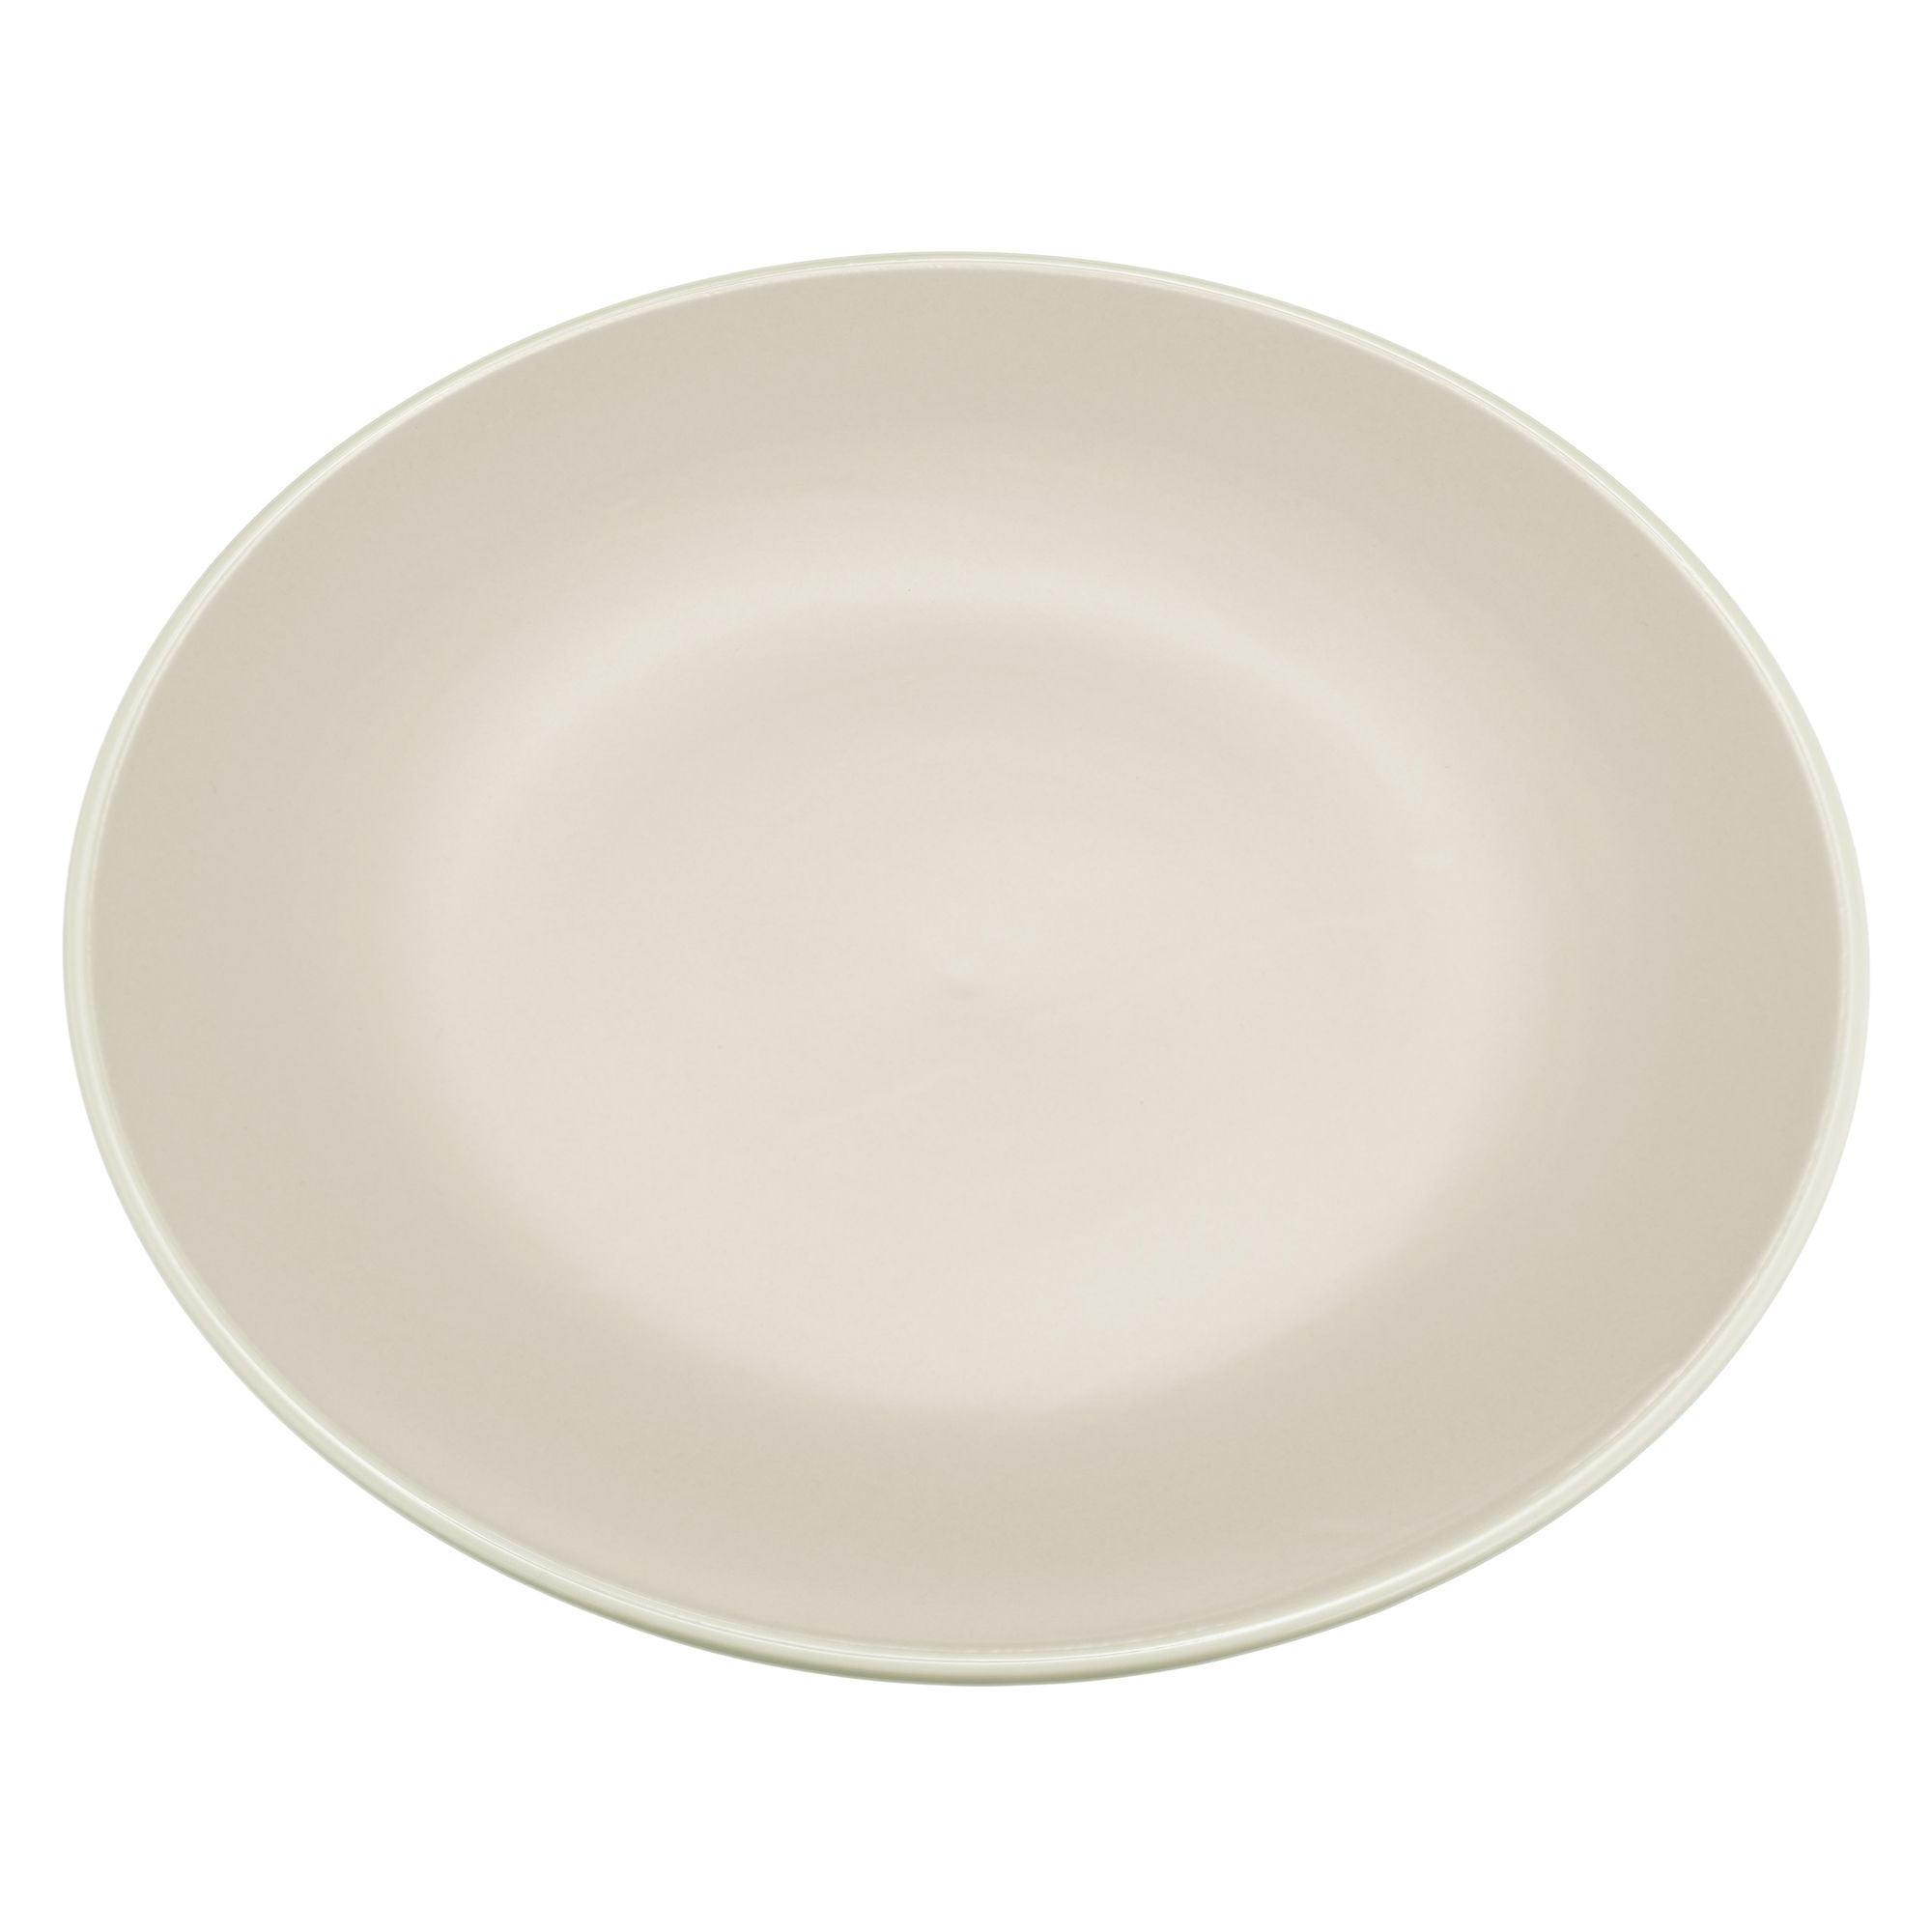 Sand Dinner Plate from China Blue